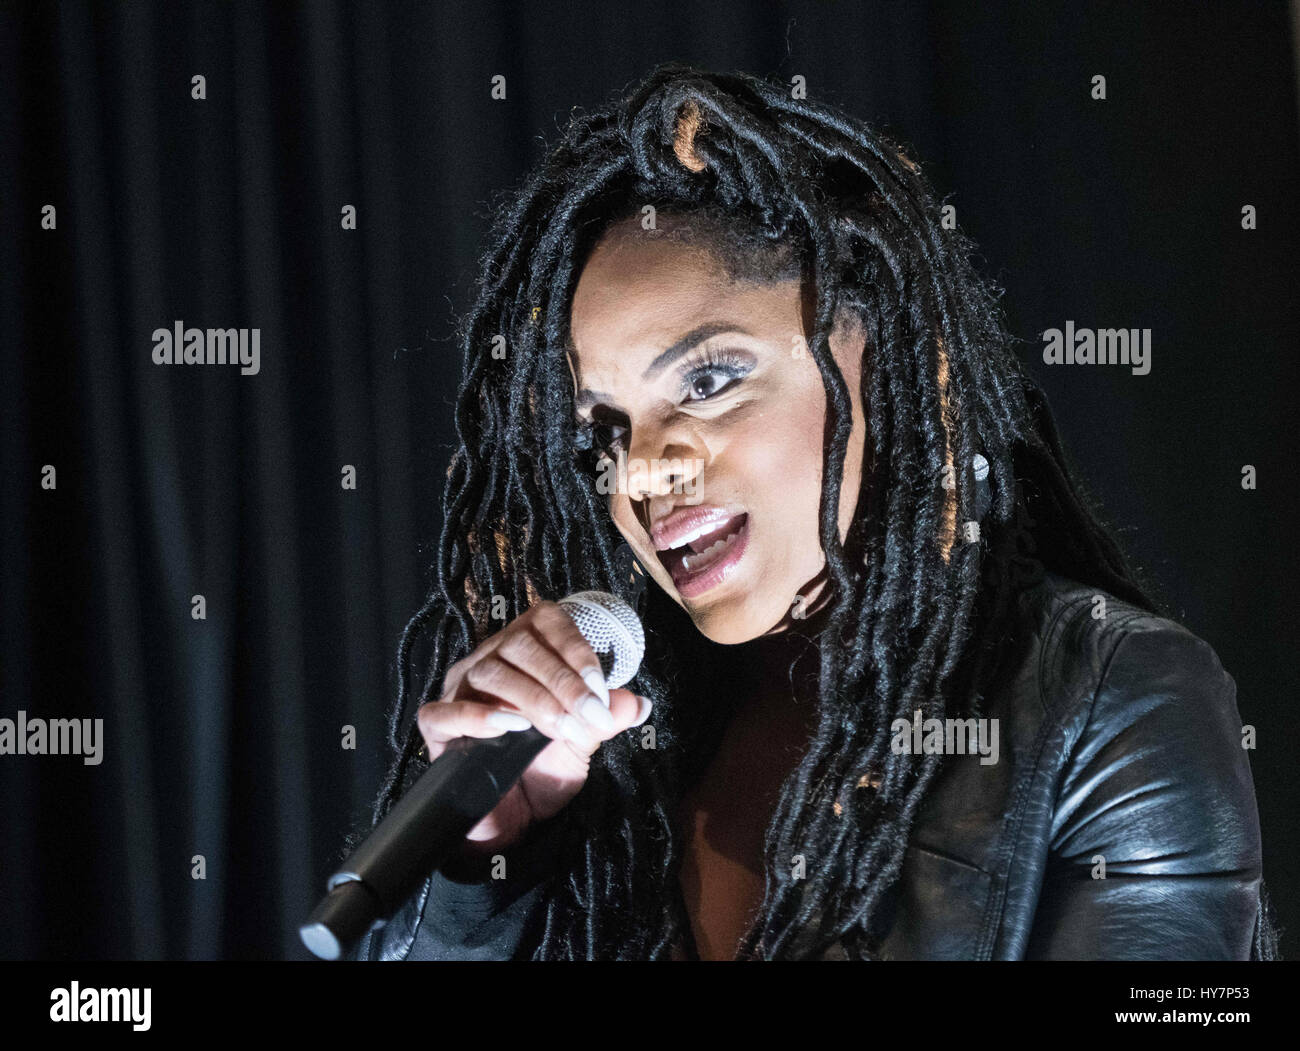 Philadelphia, Pennsylvania, USA. 1st Apr, 2017. R&B singer LEELA JAMES, performs at the WDAS Women of Excellence Award Luncheon held at the Sheraton Hotel in Philadelphia Pa It's theÂ 3rd Annual WDAS Women of Excellence Luncheon presentedÂ by Gwynedd Mercy University. Credit: Ricky Fitchett/ZUMA Wire/Alamy Live News Stock Photo